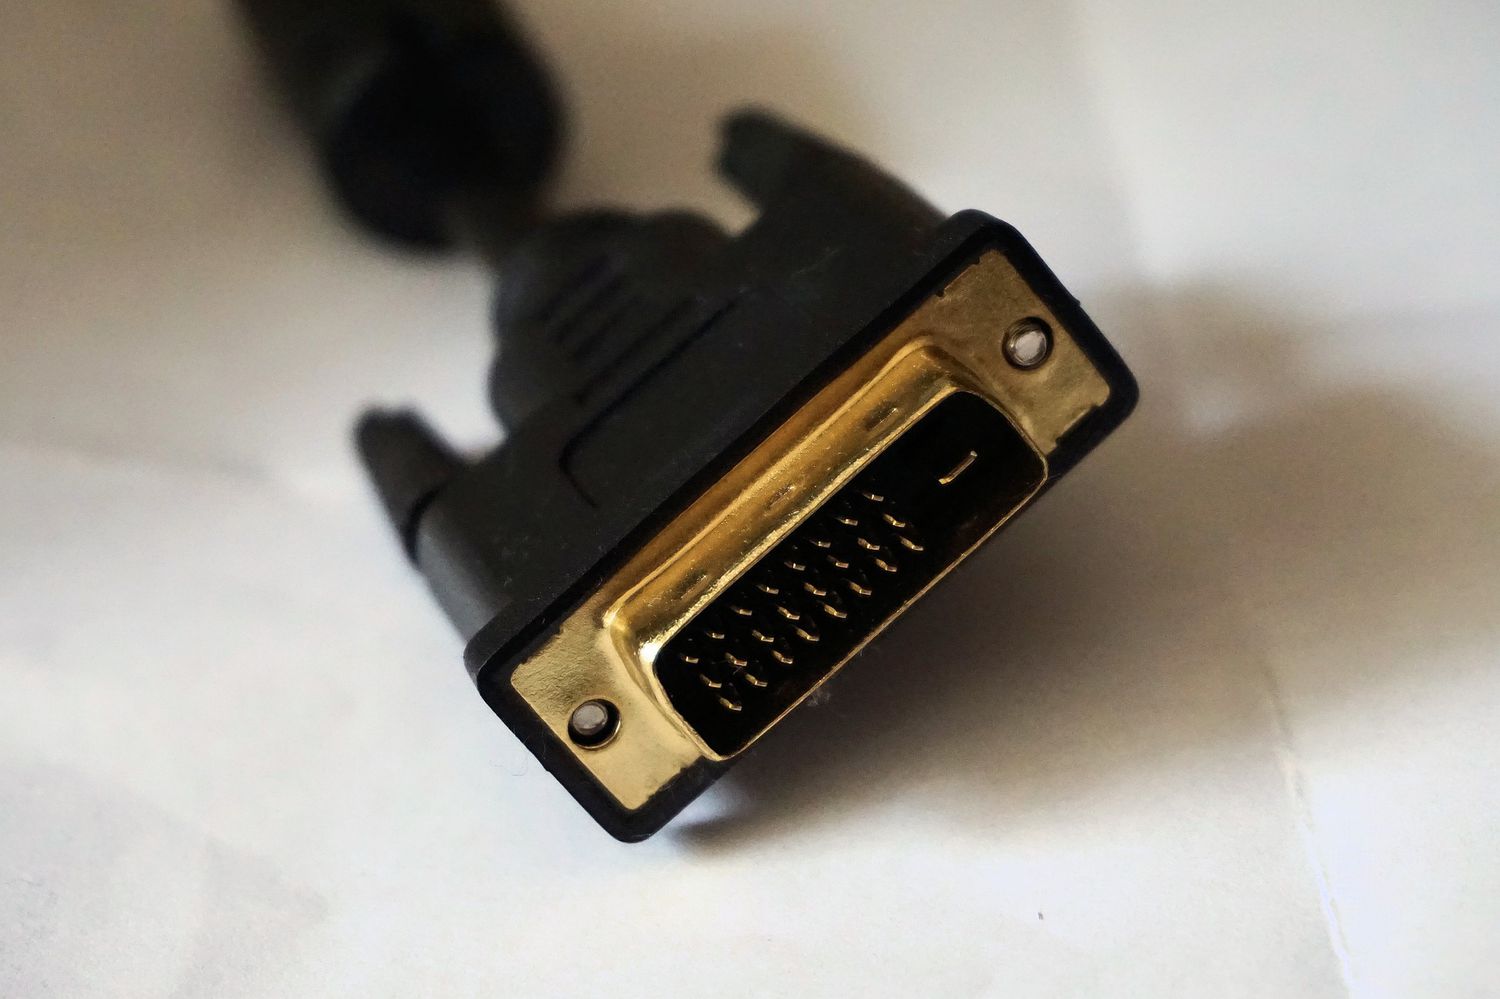 DVI Cables & Adapters